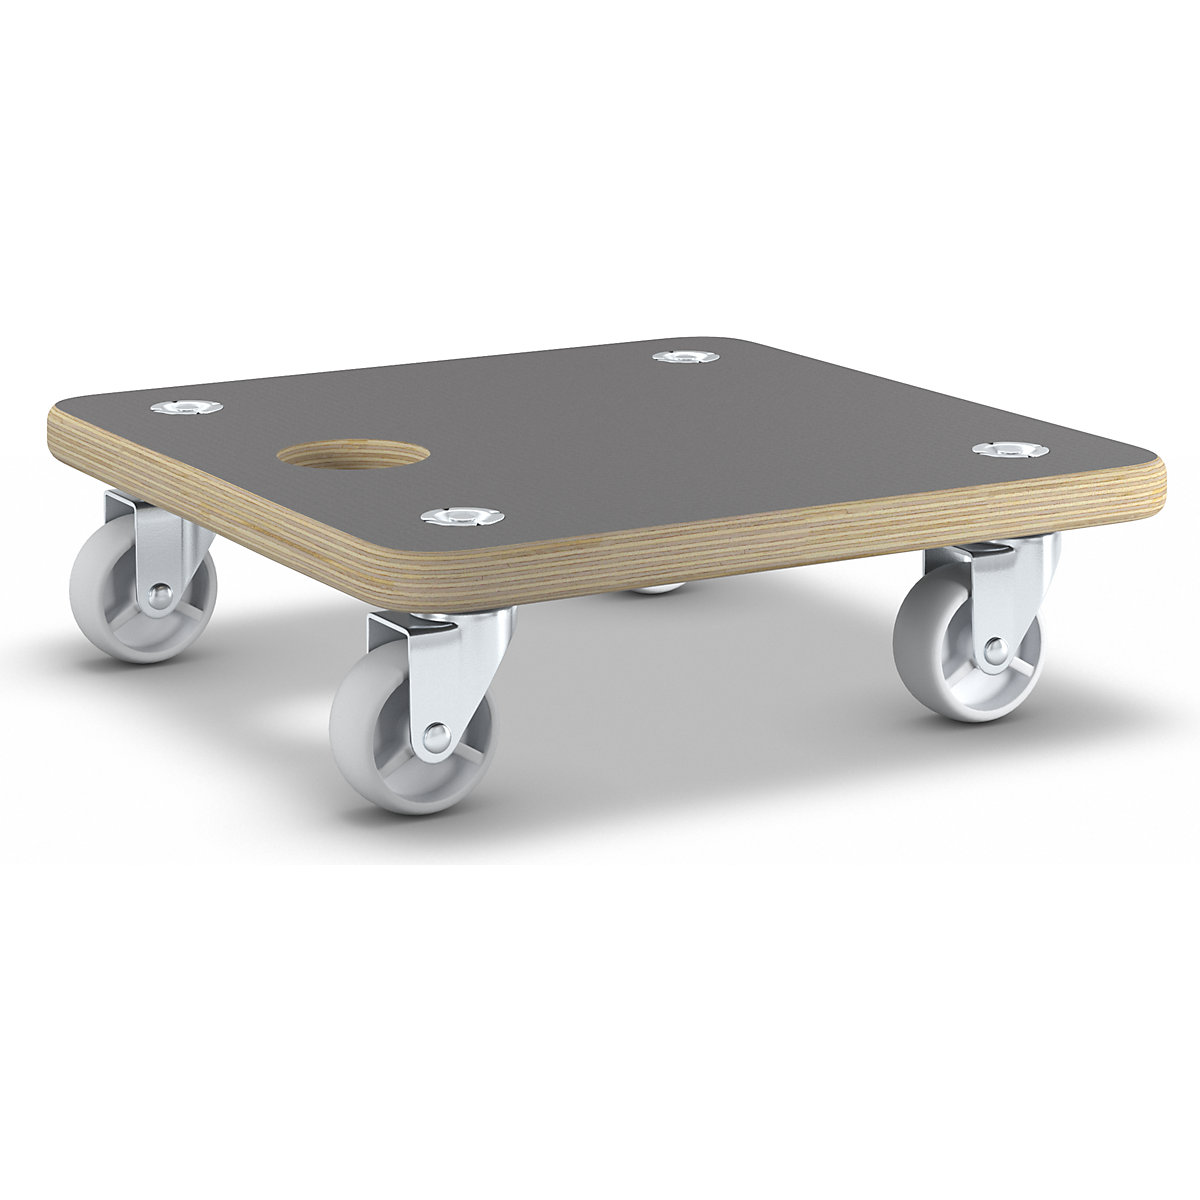 MaxiGRIP GH 1350 universal dolly – Wagner